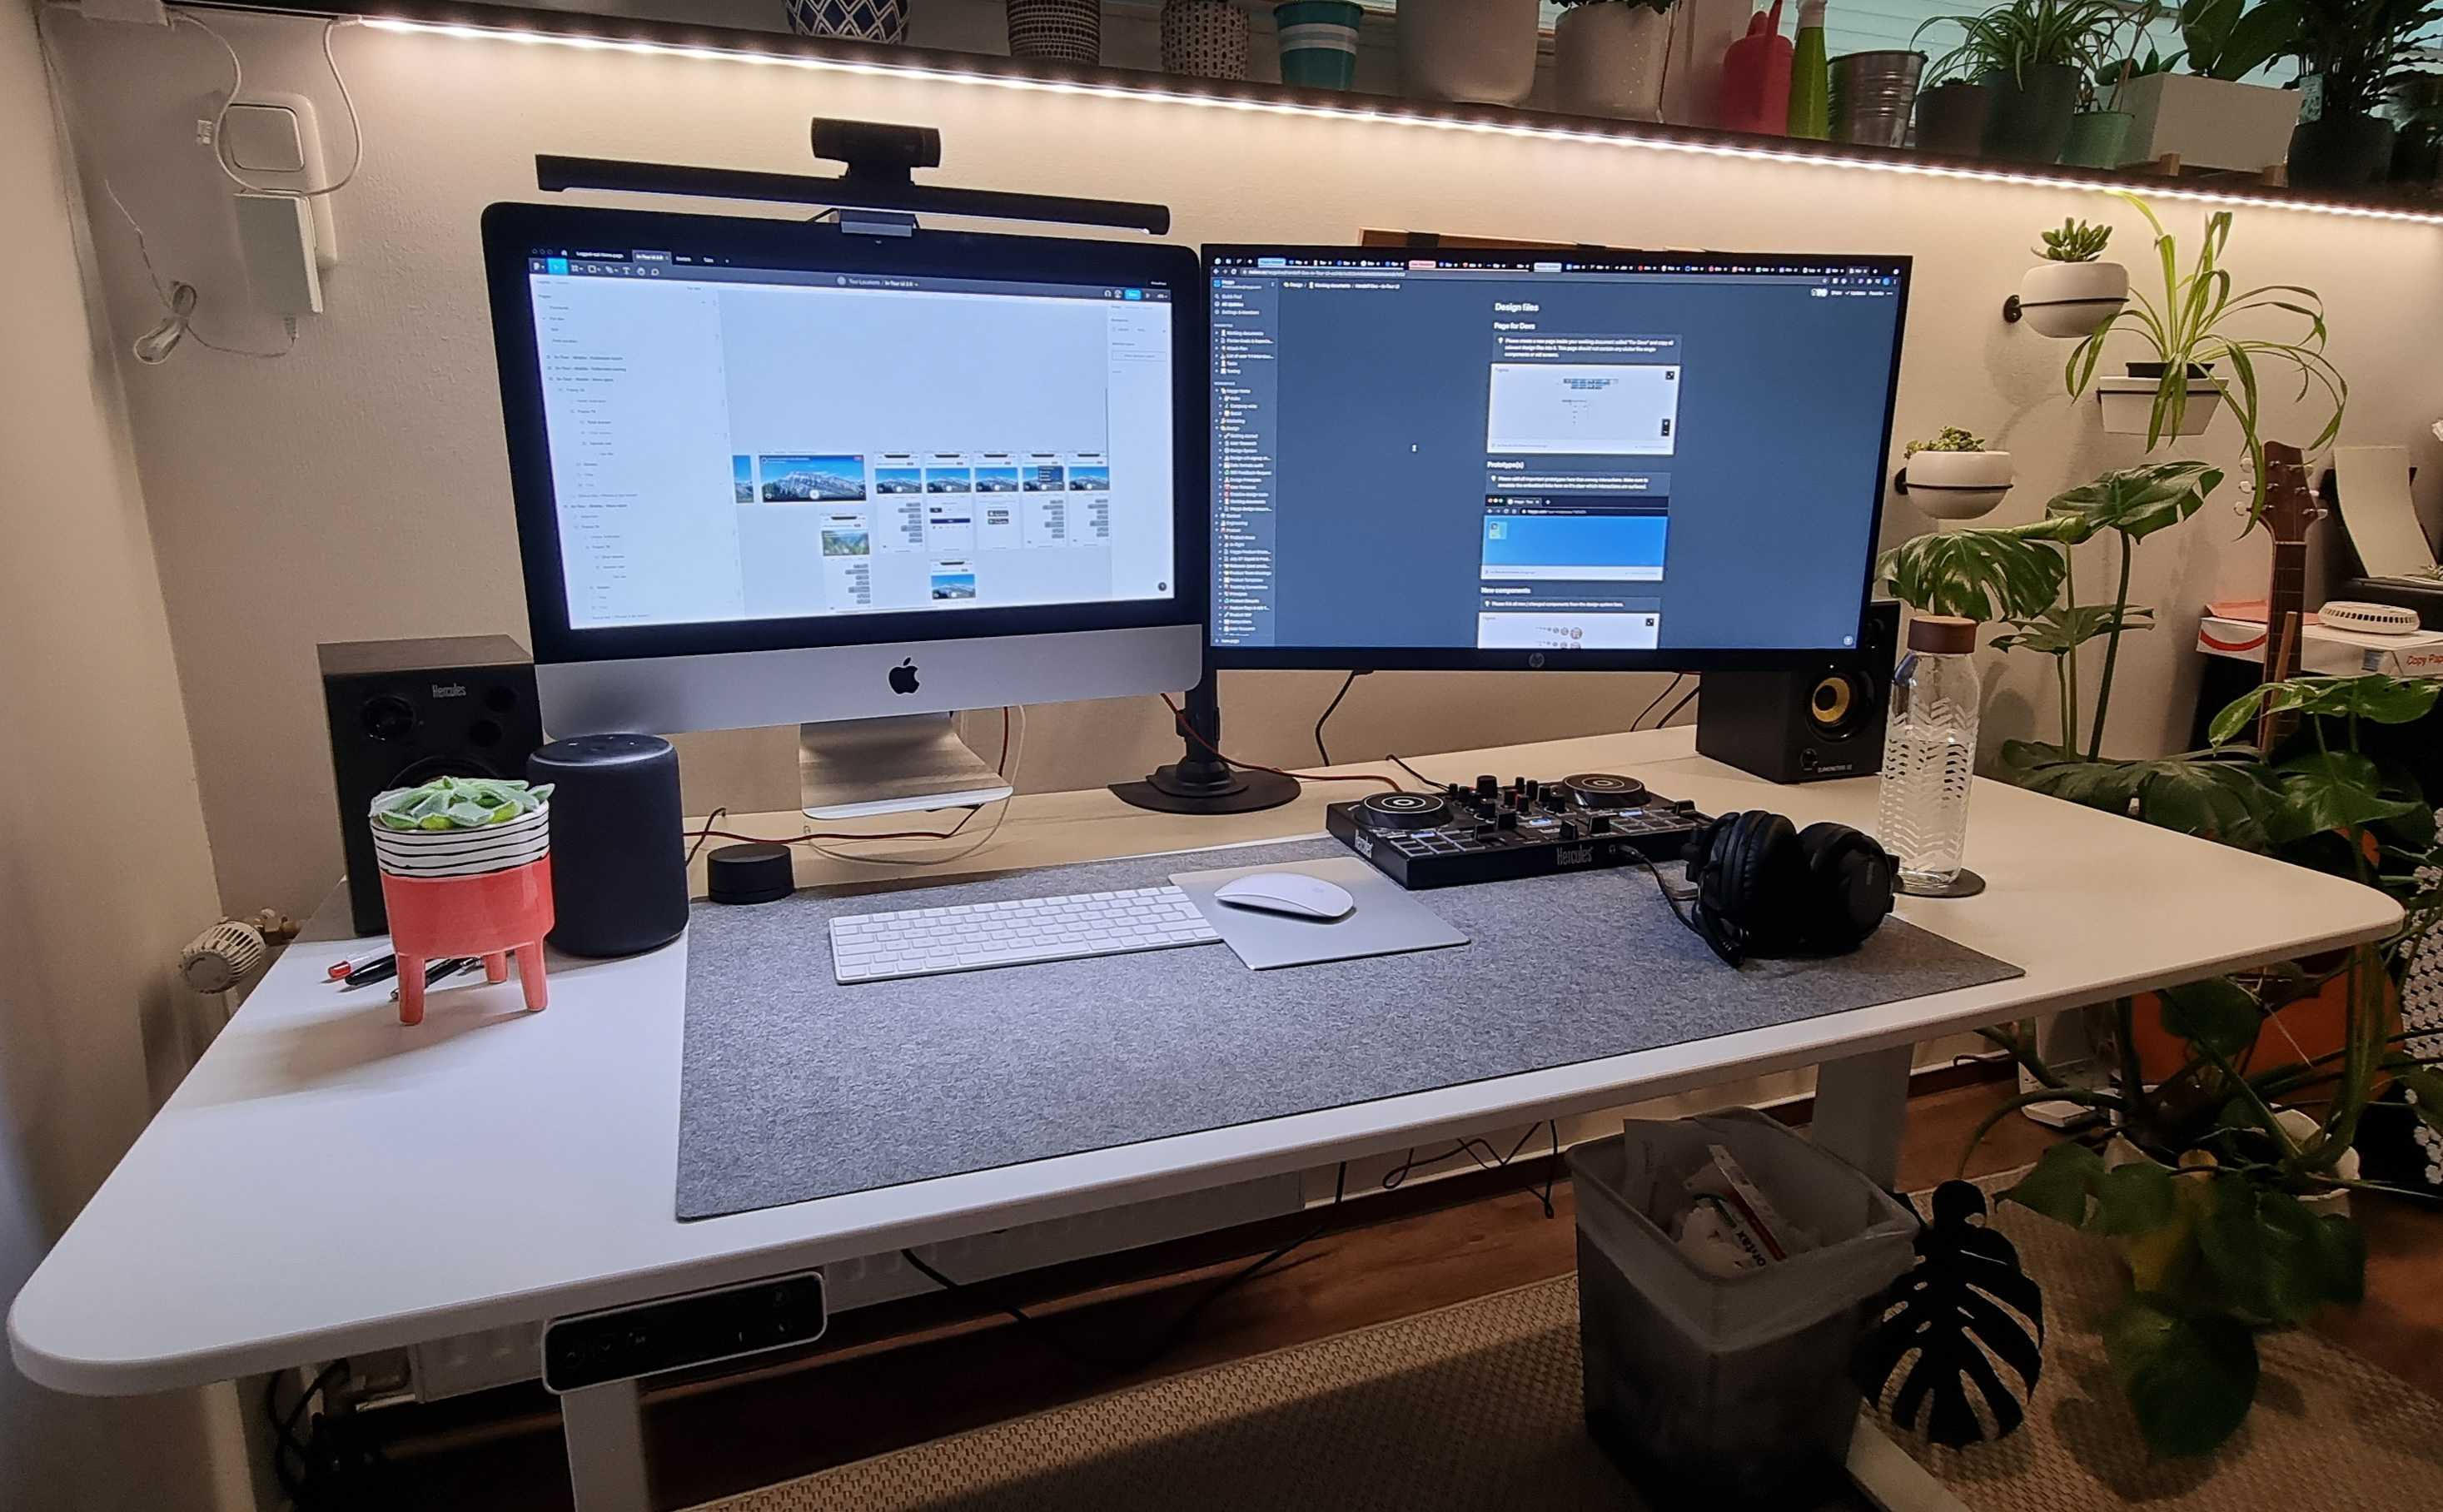 Florian's remote, home office set up as a digital product designer